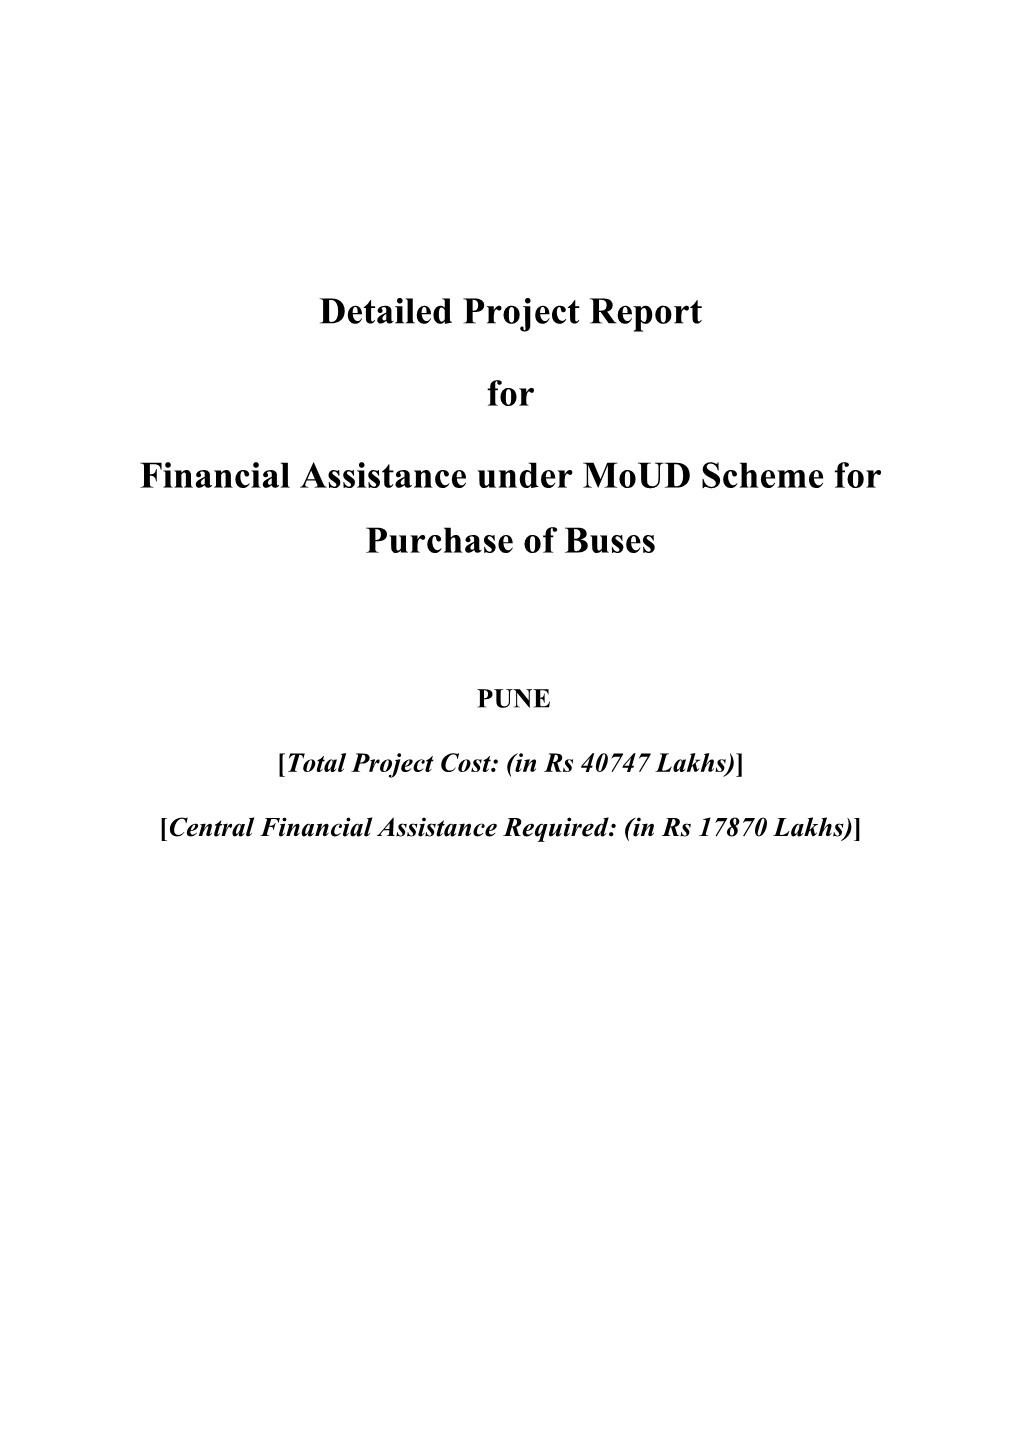 Detailed Project Report for Financial Assistance Under Moud Scheme